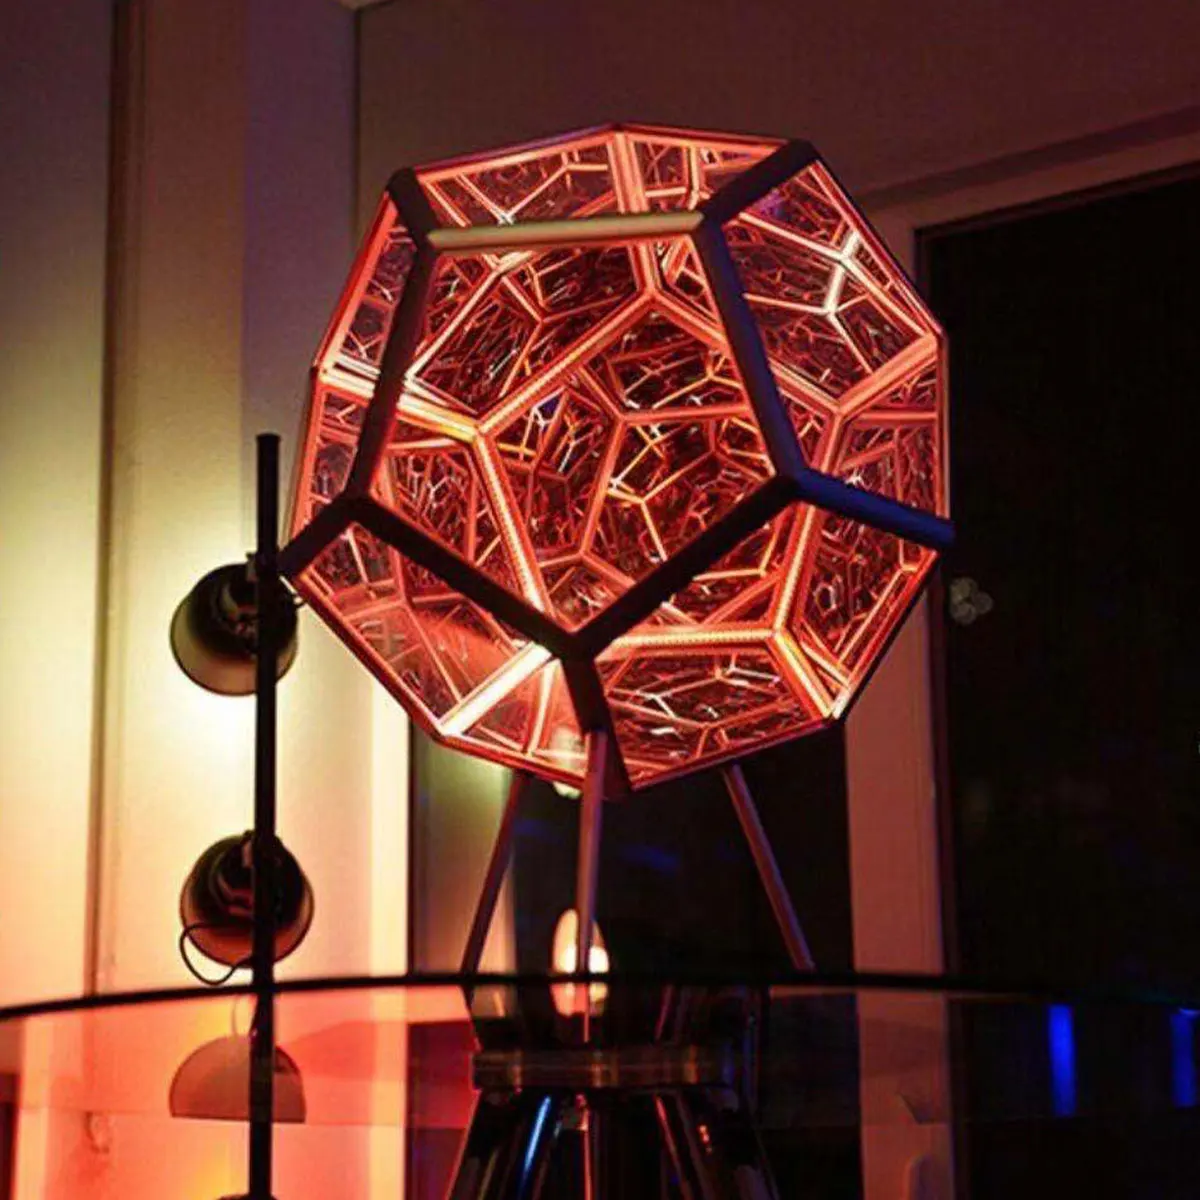 Infinity Dodecahedron Color Art Light Fantasy Geometry Space LED Art Lamp USB Charging Adjustable Color Decor Night Lamp mushroom night light